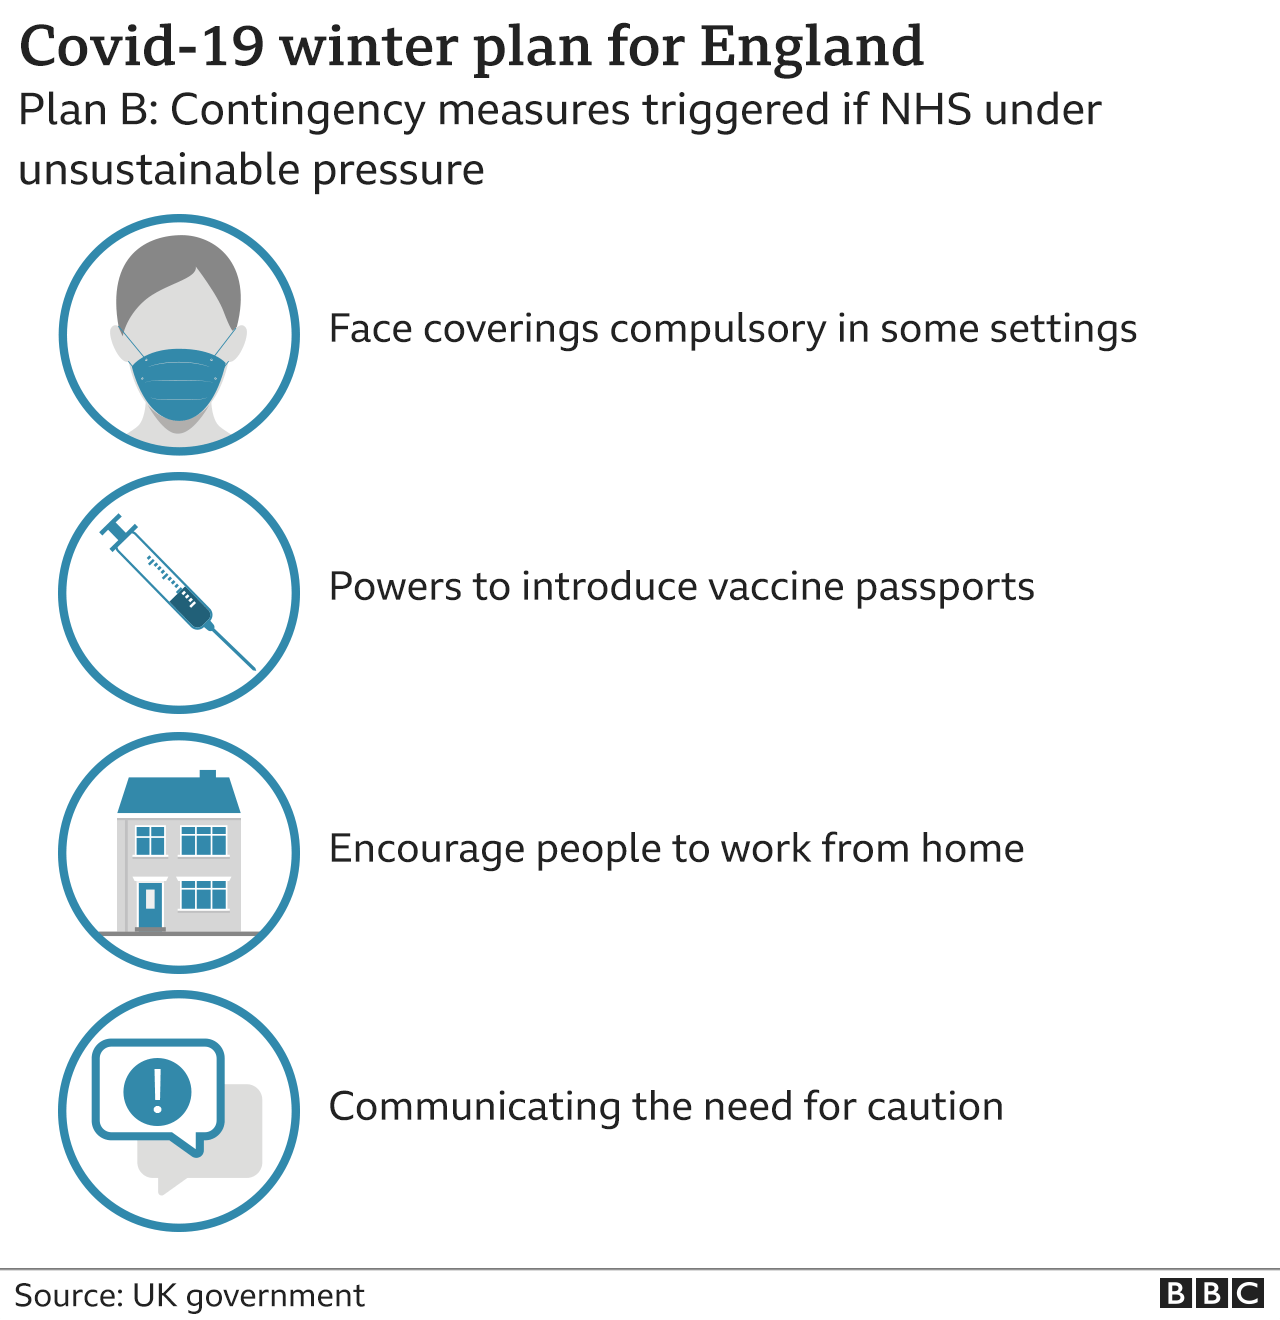 Graphic showing measures to be taken under the government's Covid plan B for winter